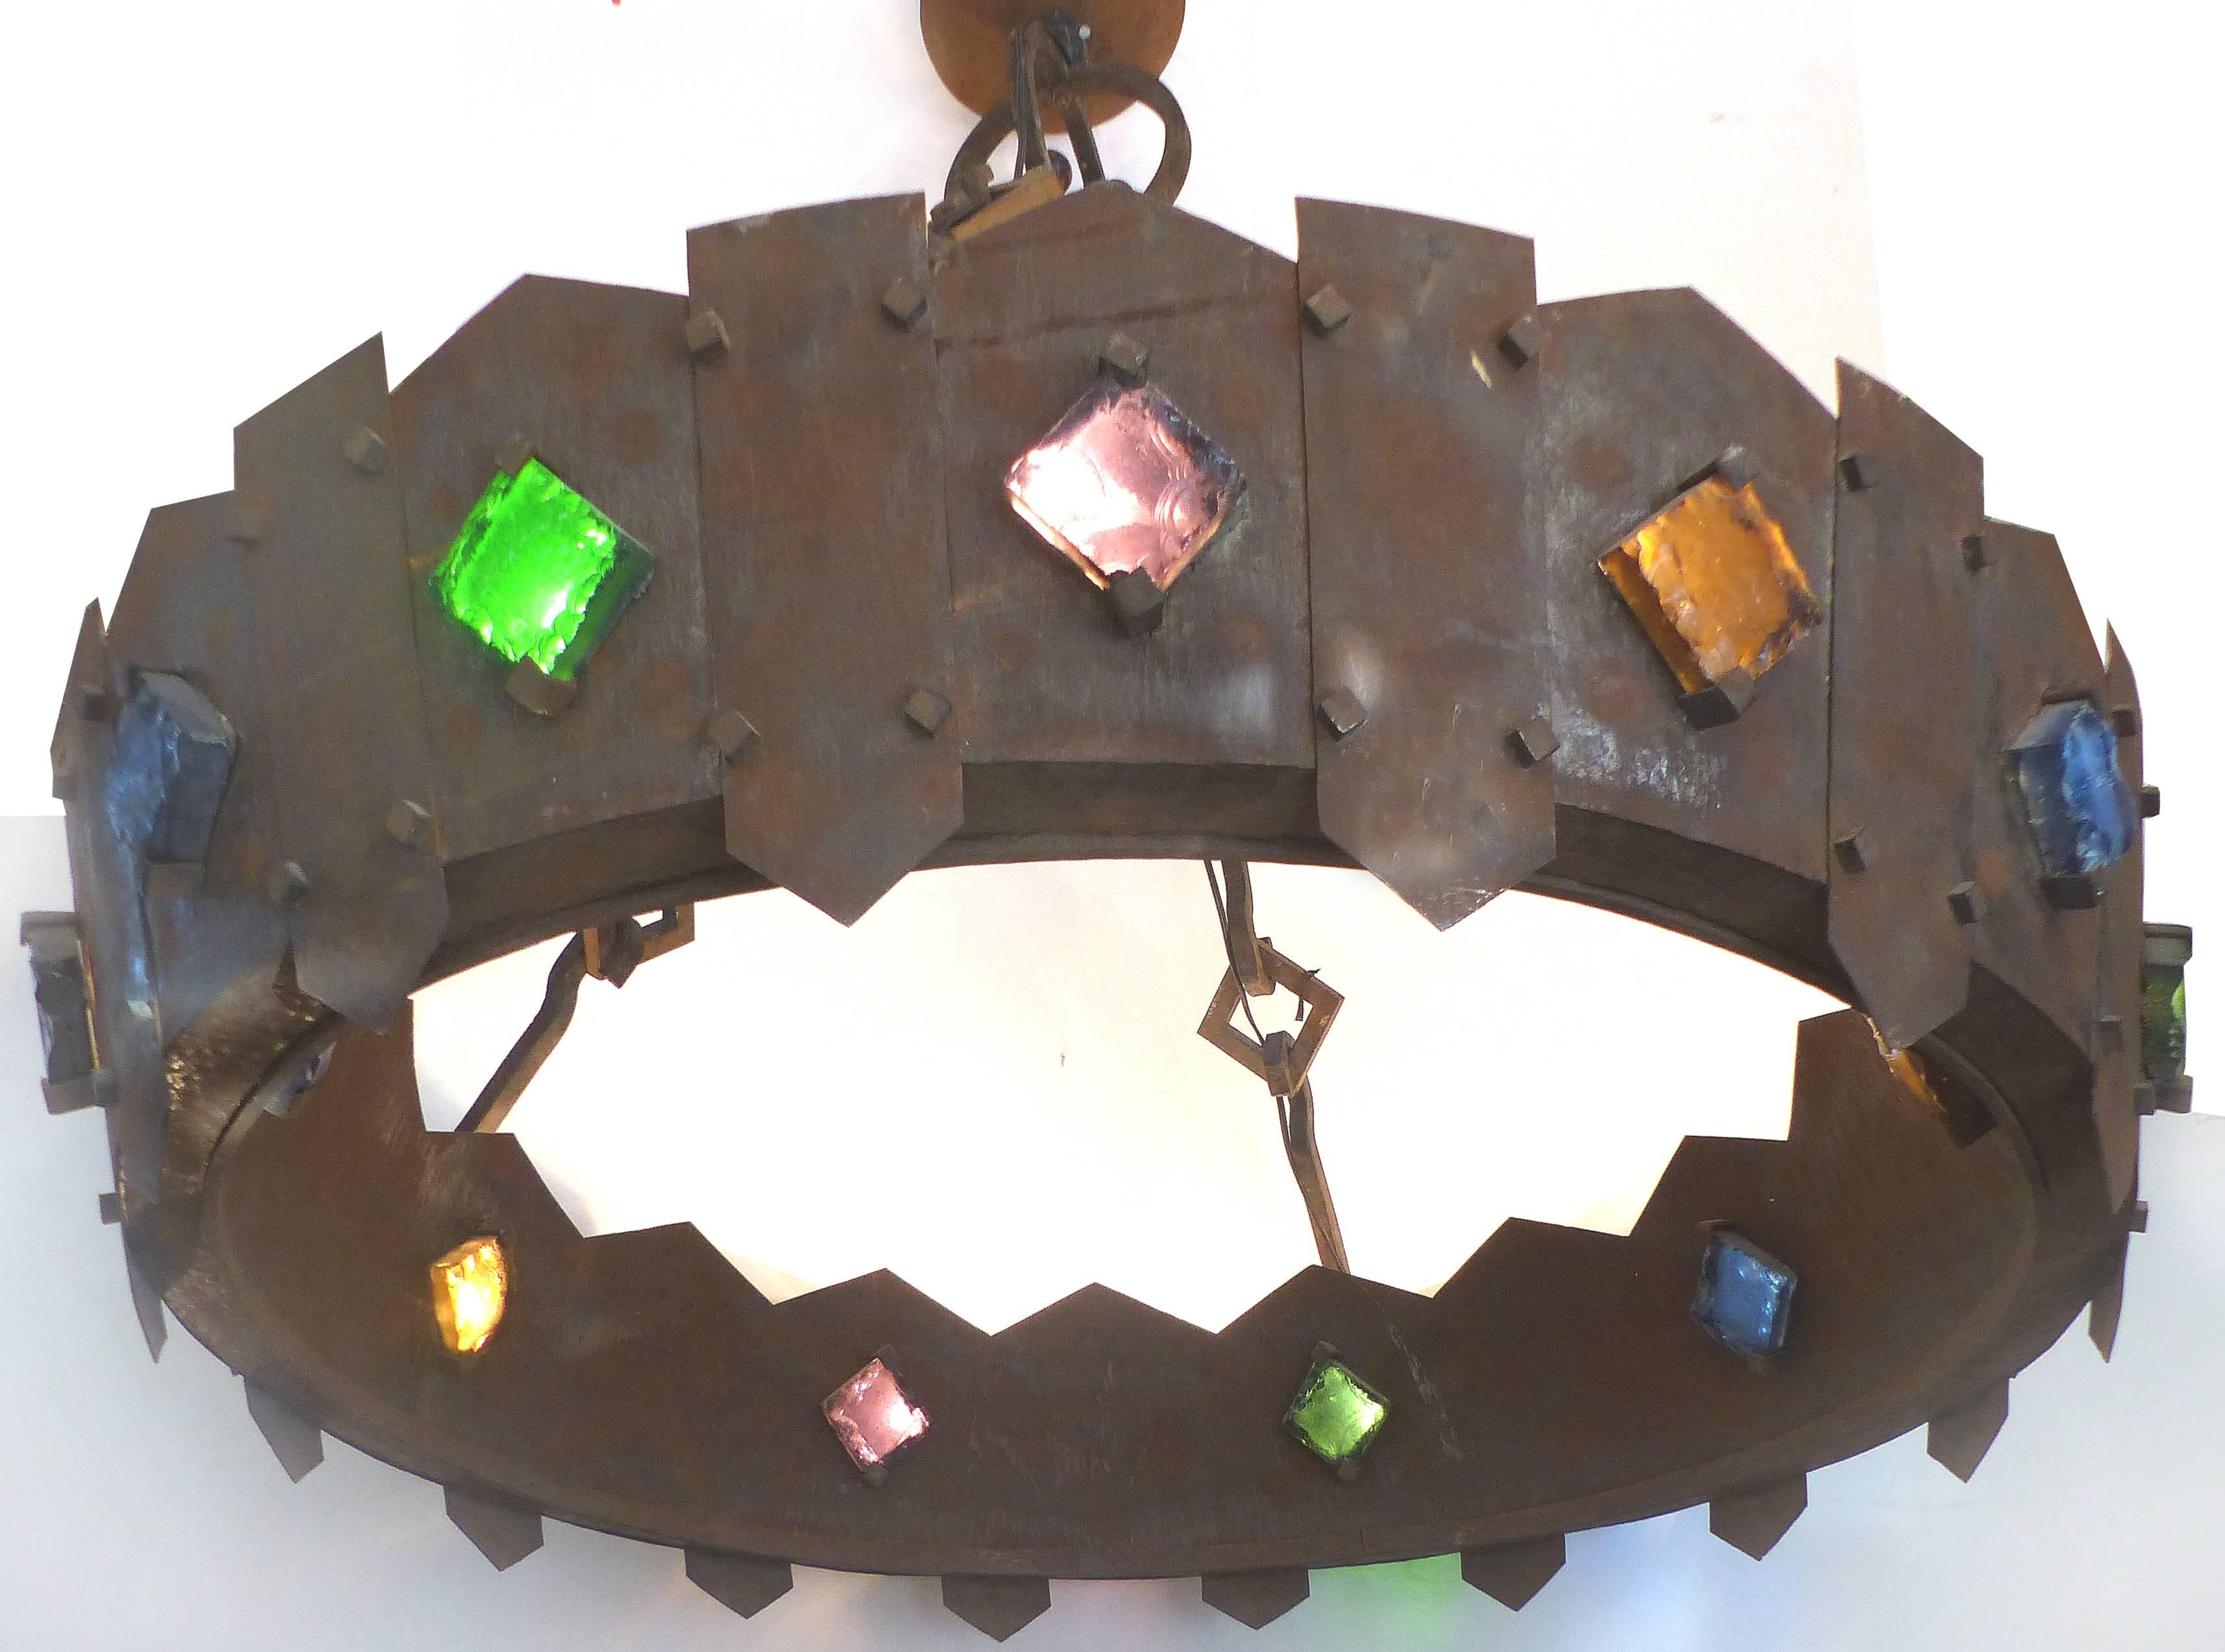 A monumental forged iron chandelier acquired in France created in the Gothic style. This wonderful fixture is wired with lights that illuminate upwards and through the colored slag glass mounted on the ring. The fixture is supported by a massive